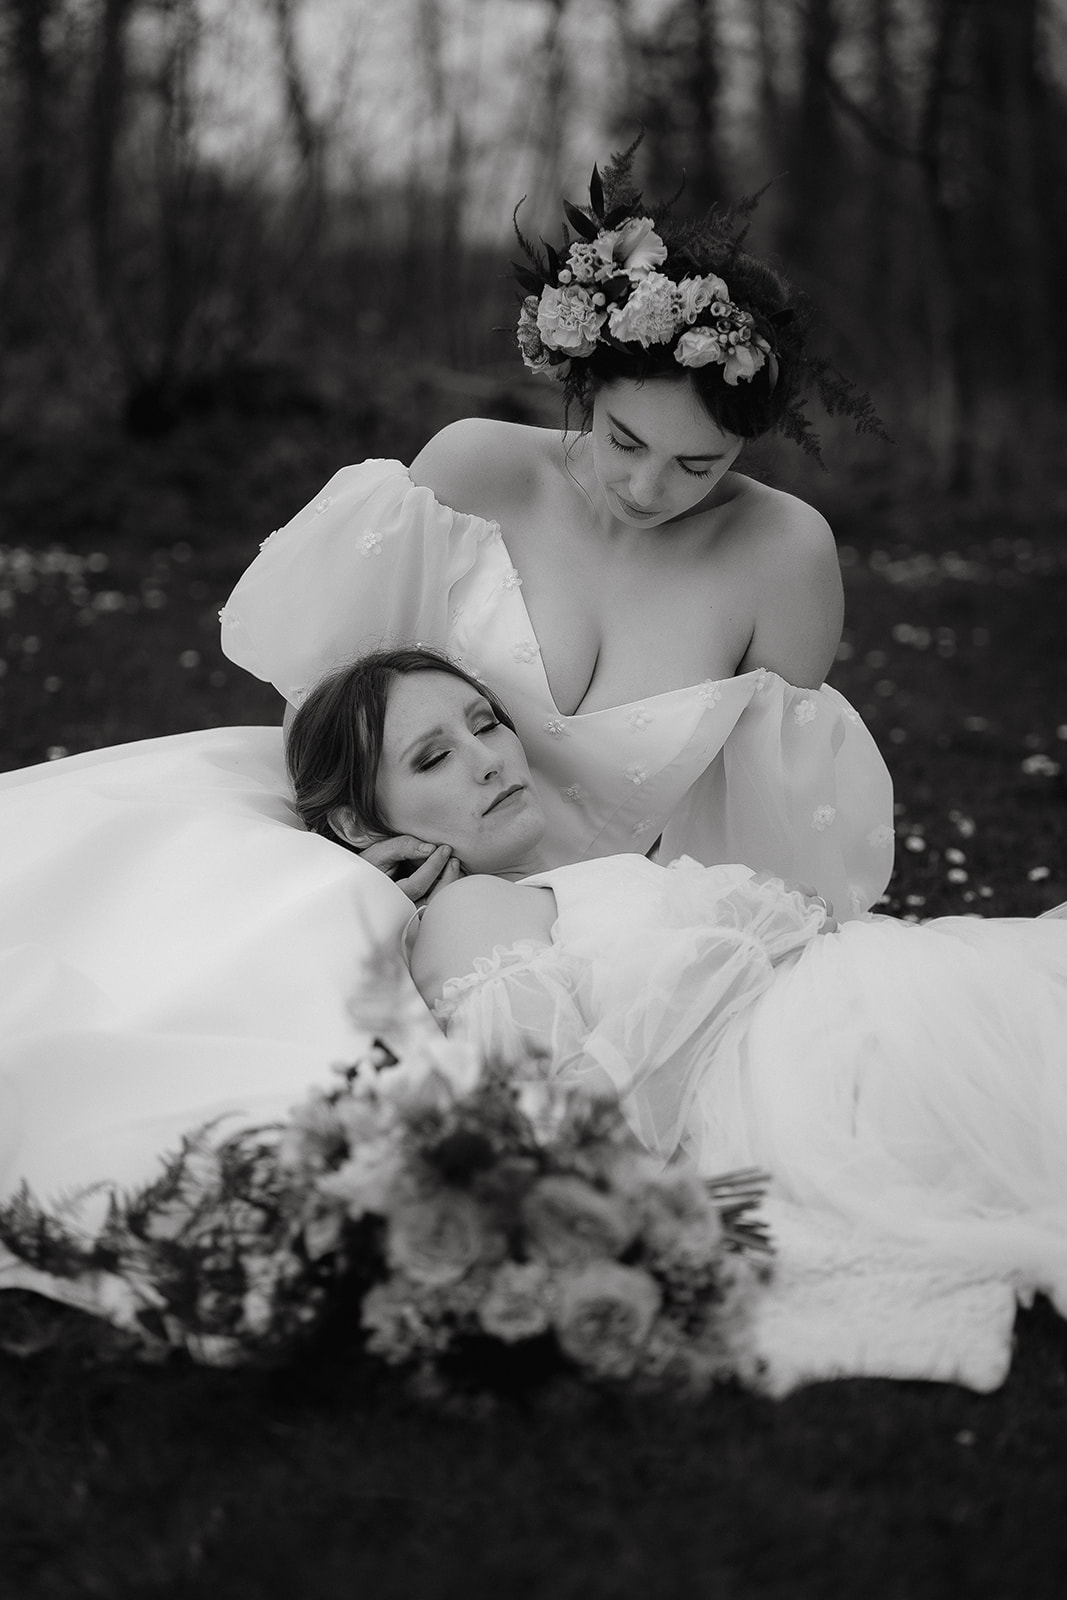 two brides sit and snuggle together on the grounds of Mapledurham House wedding venue in the spring sunshine